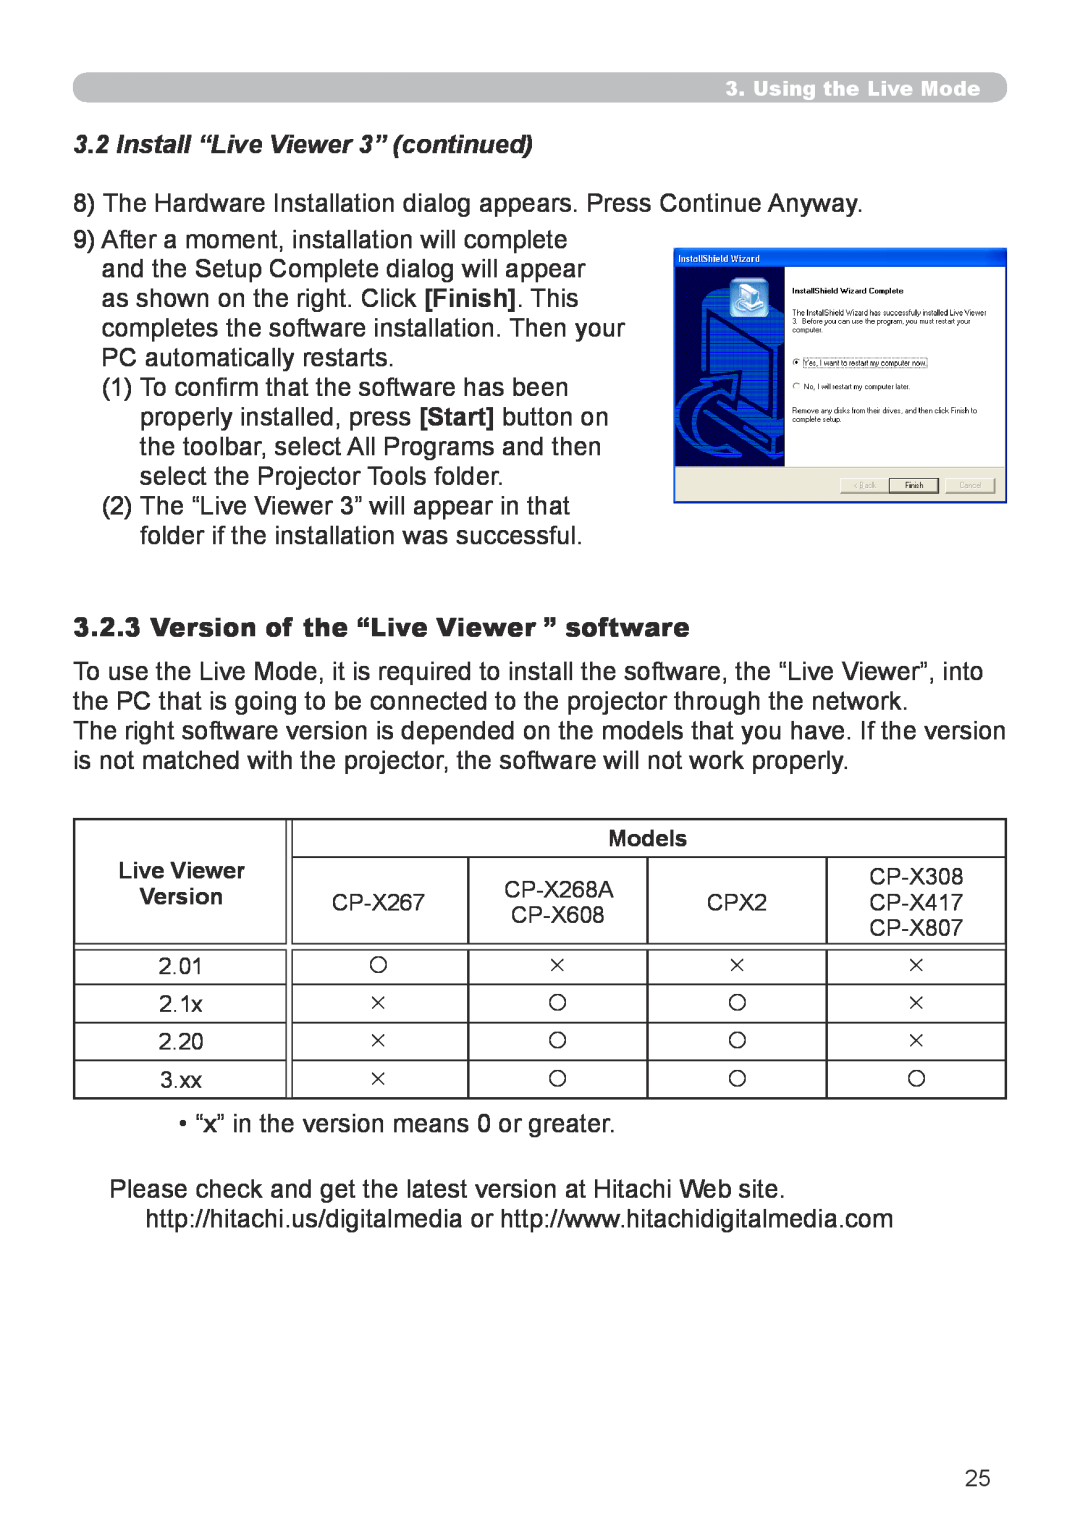 Hitachi CP-X267 user manual Install “Live Viewer 3” continued, Version of the “Live Viewer ” software 